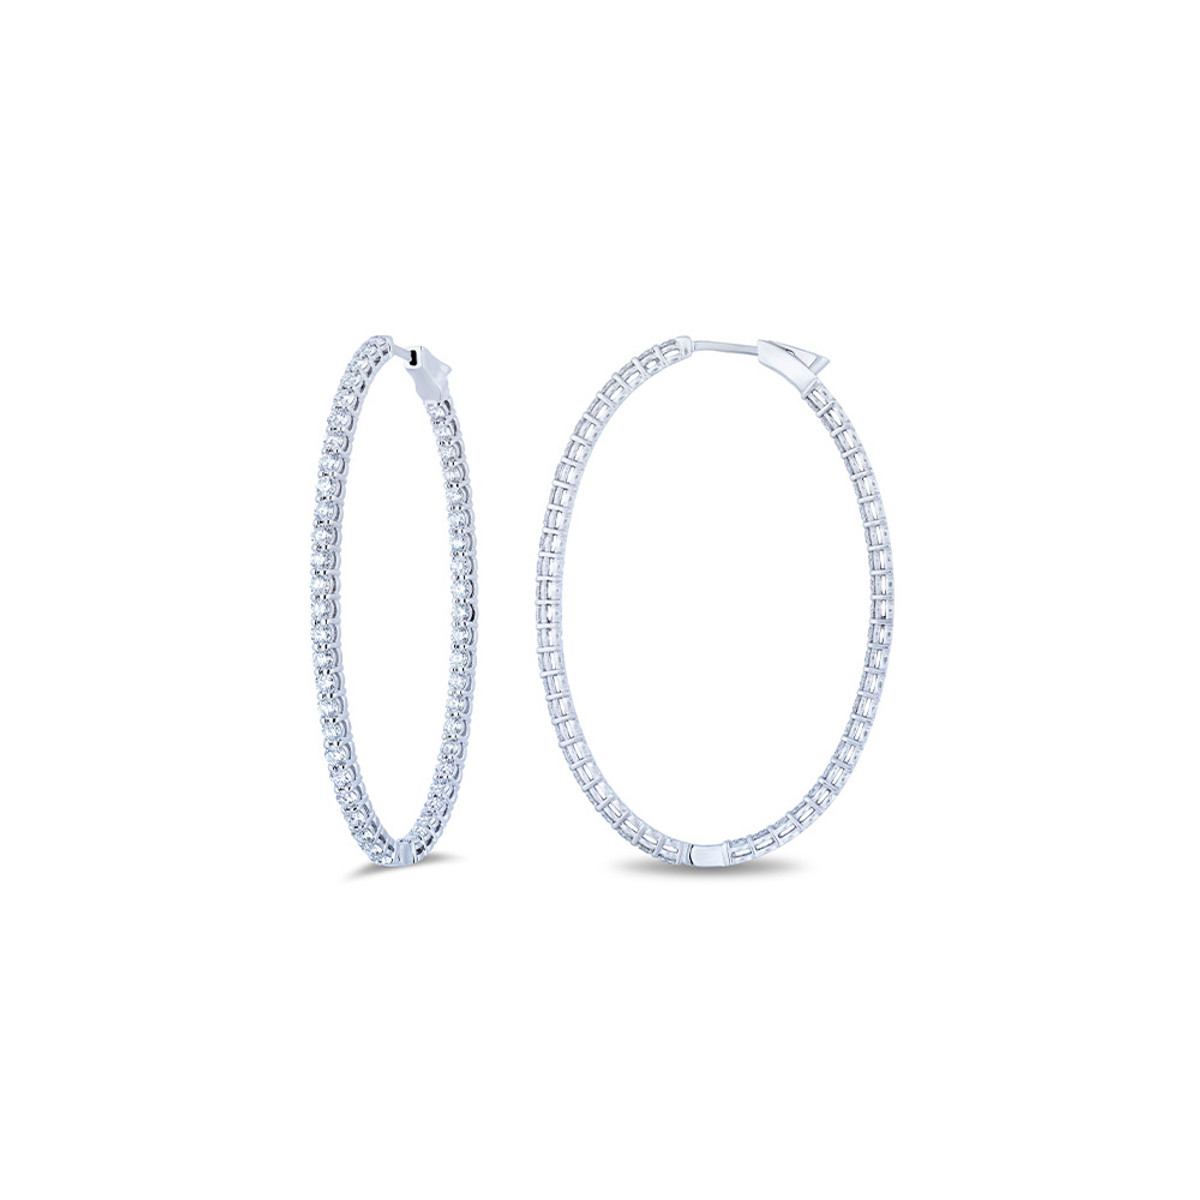 Hyde Park Collection 18K White Gold Diamond Oval Hoop Earrings-45960 Product Image